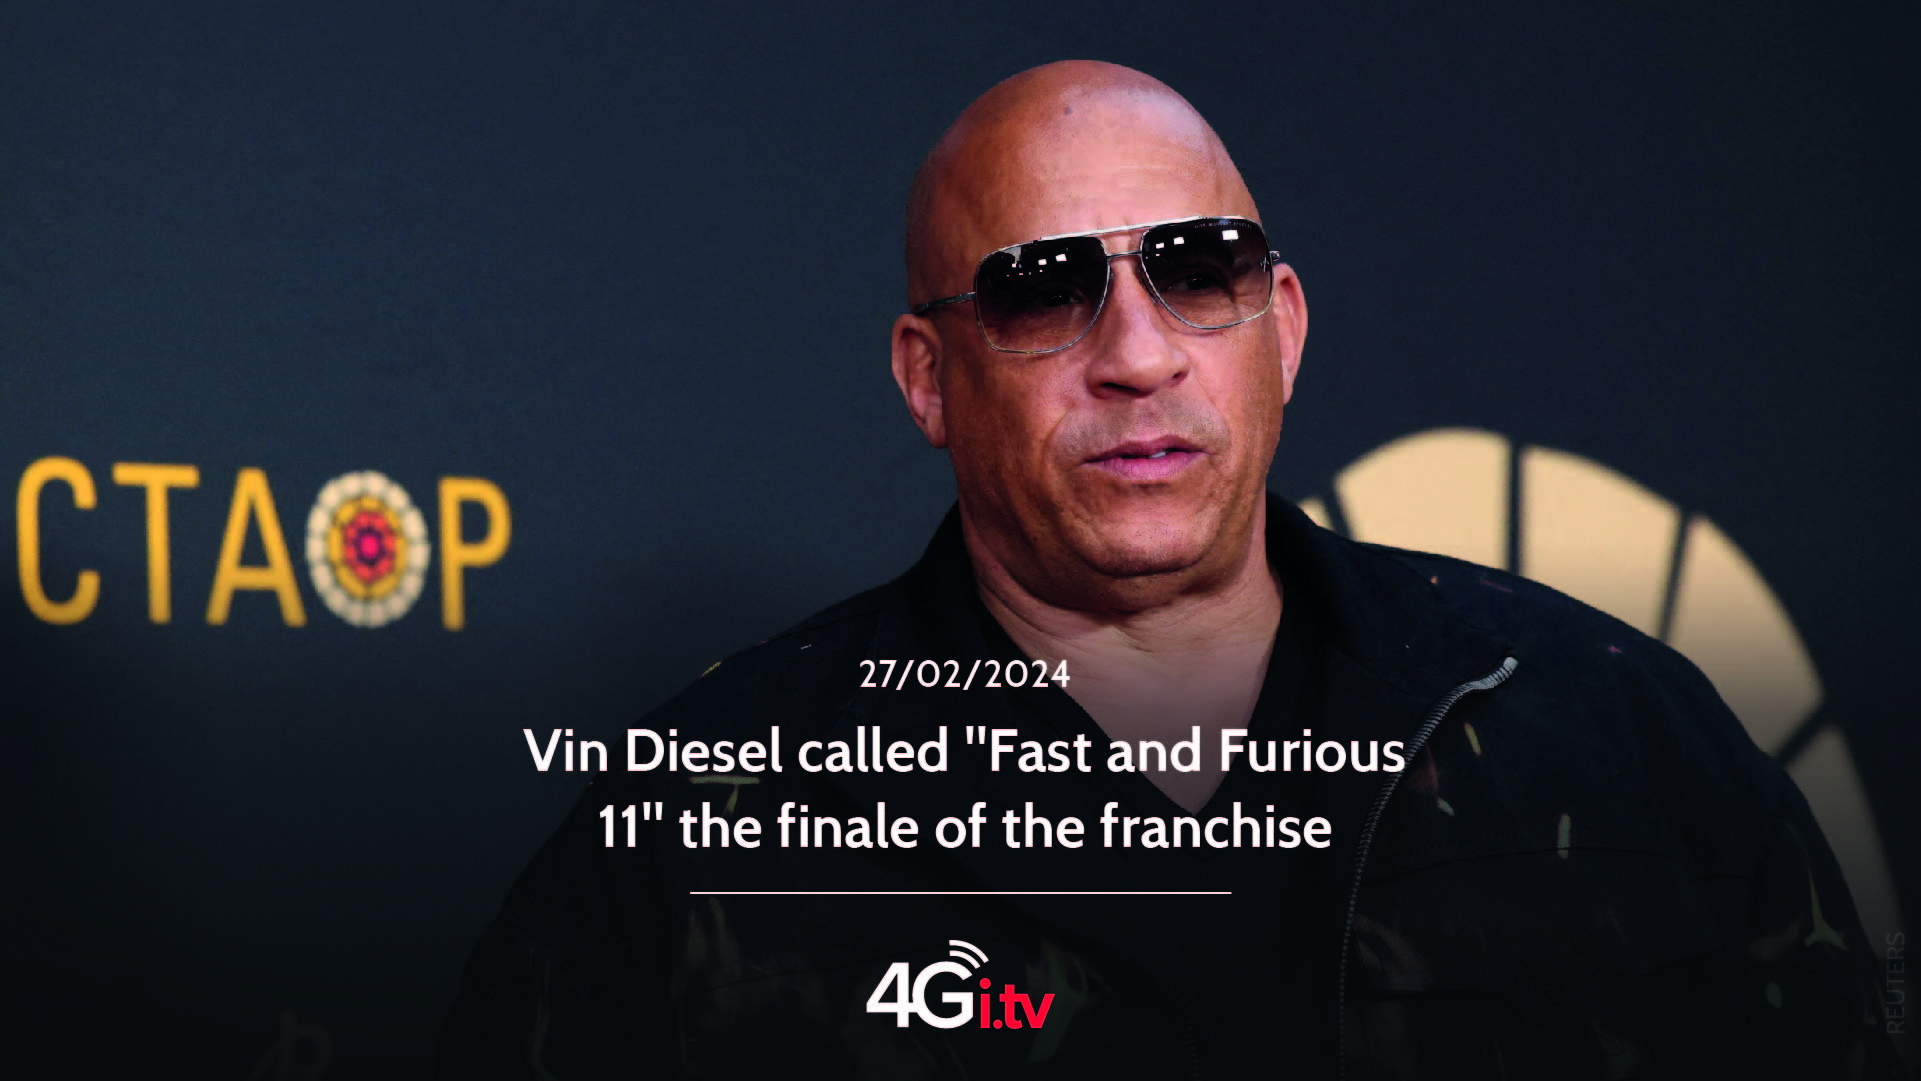 Подробнее о статье Vin Diesel called “Fast and Furious 11” the finale of the franchise